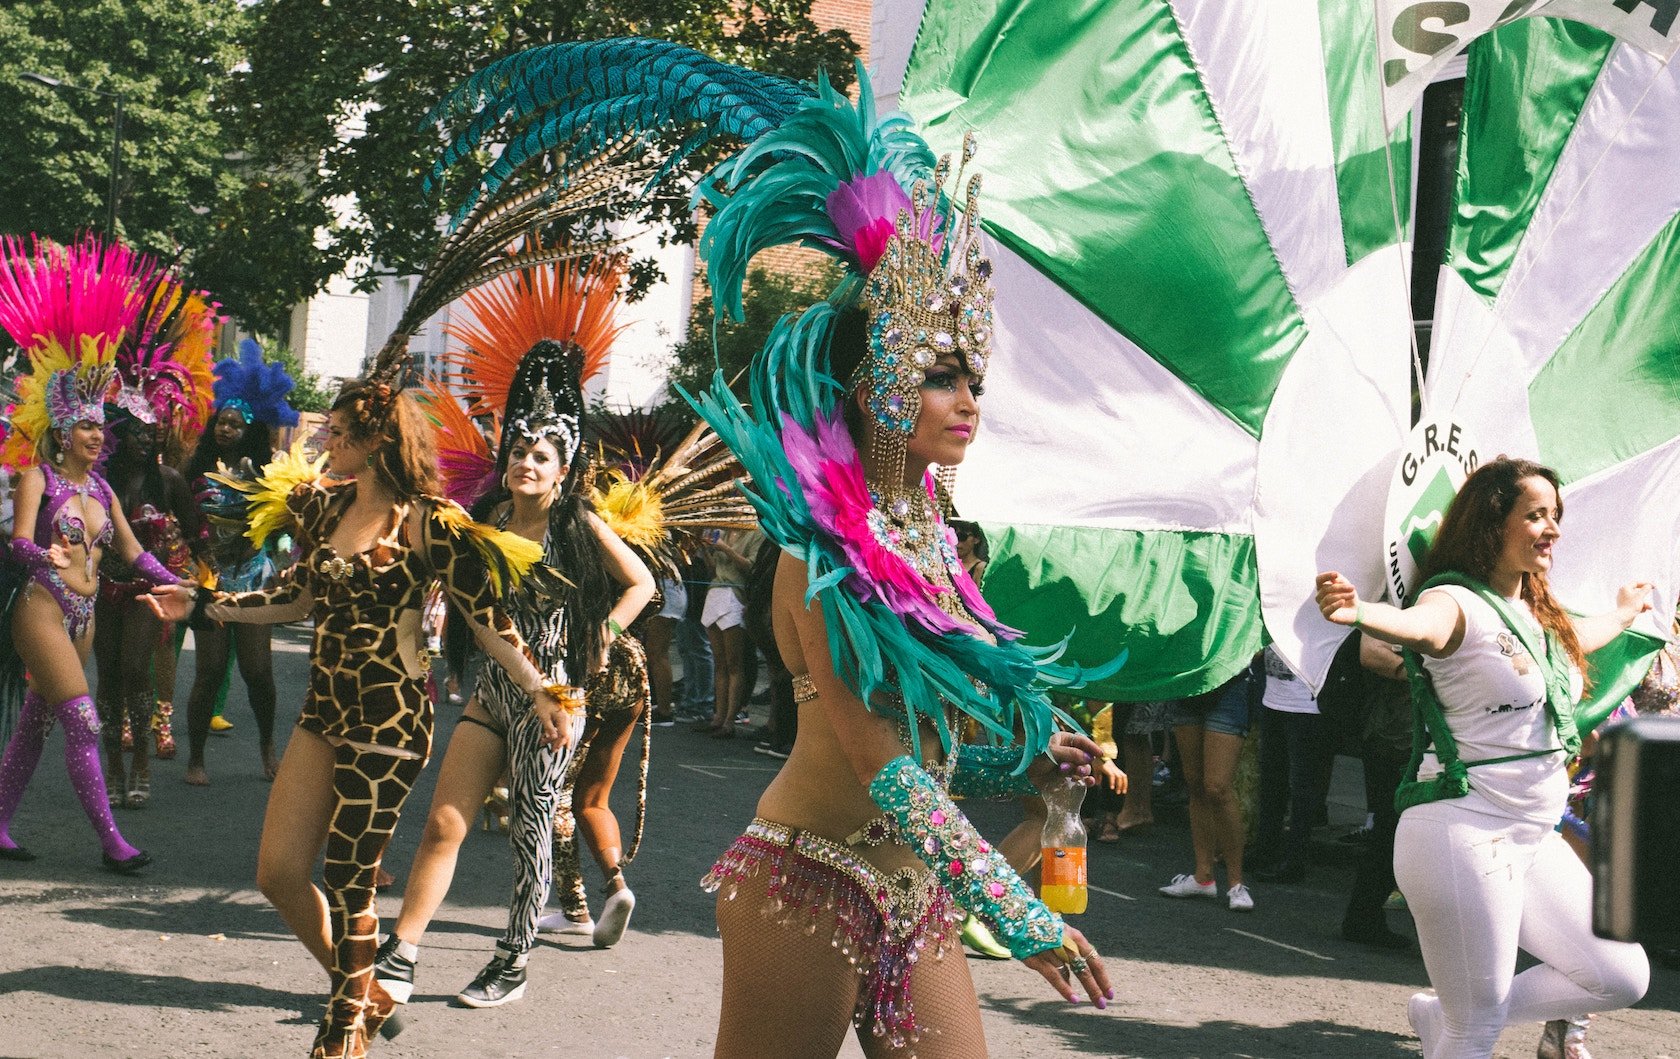 Festivities and Feathers The FirstTimer’s Guide to Notting Hill